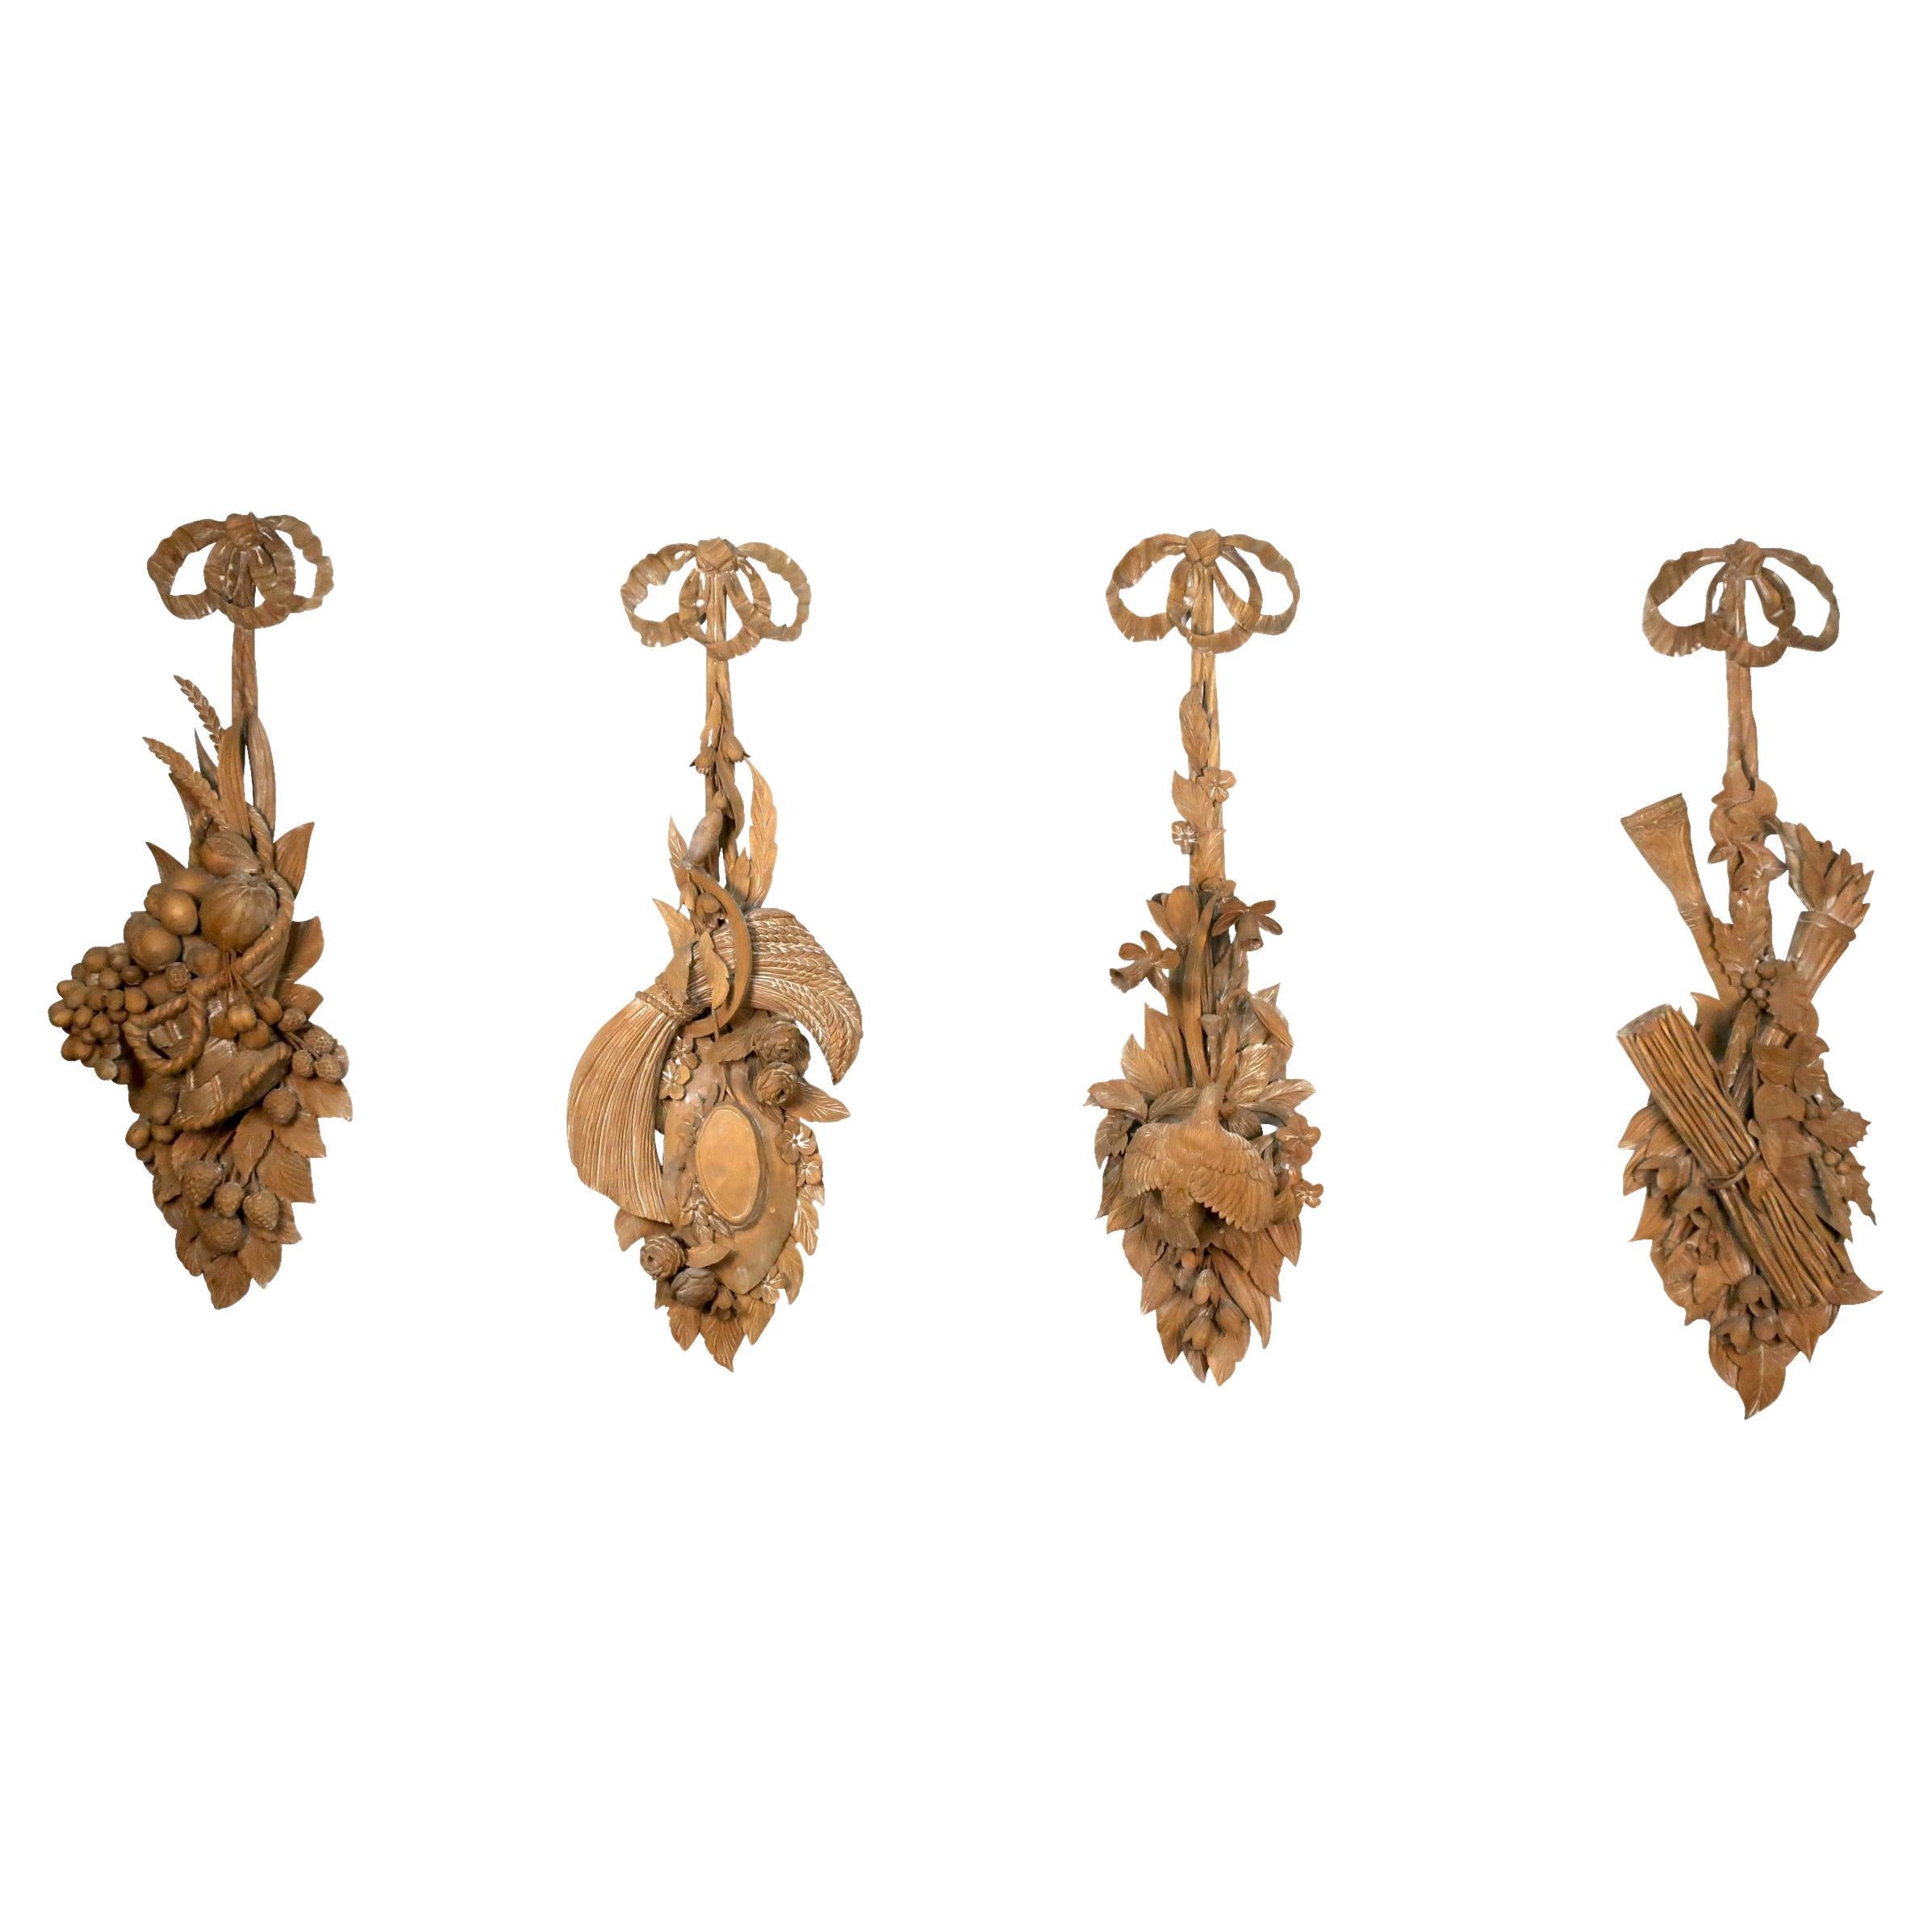 Four Continental Wood Carved Panels of the "Four Seasons" with Ribbon Hangers For Sale